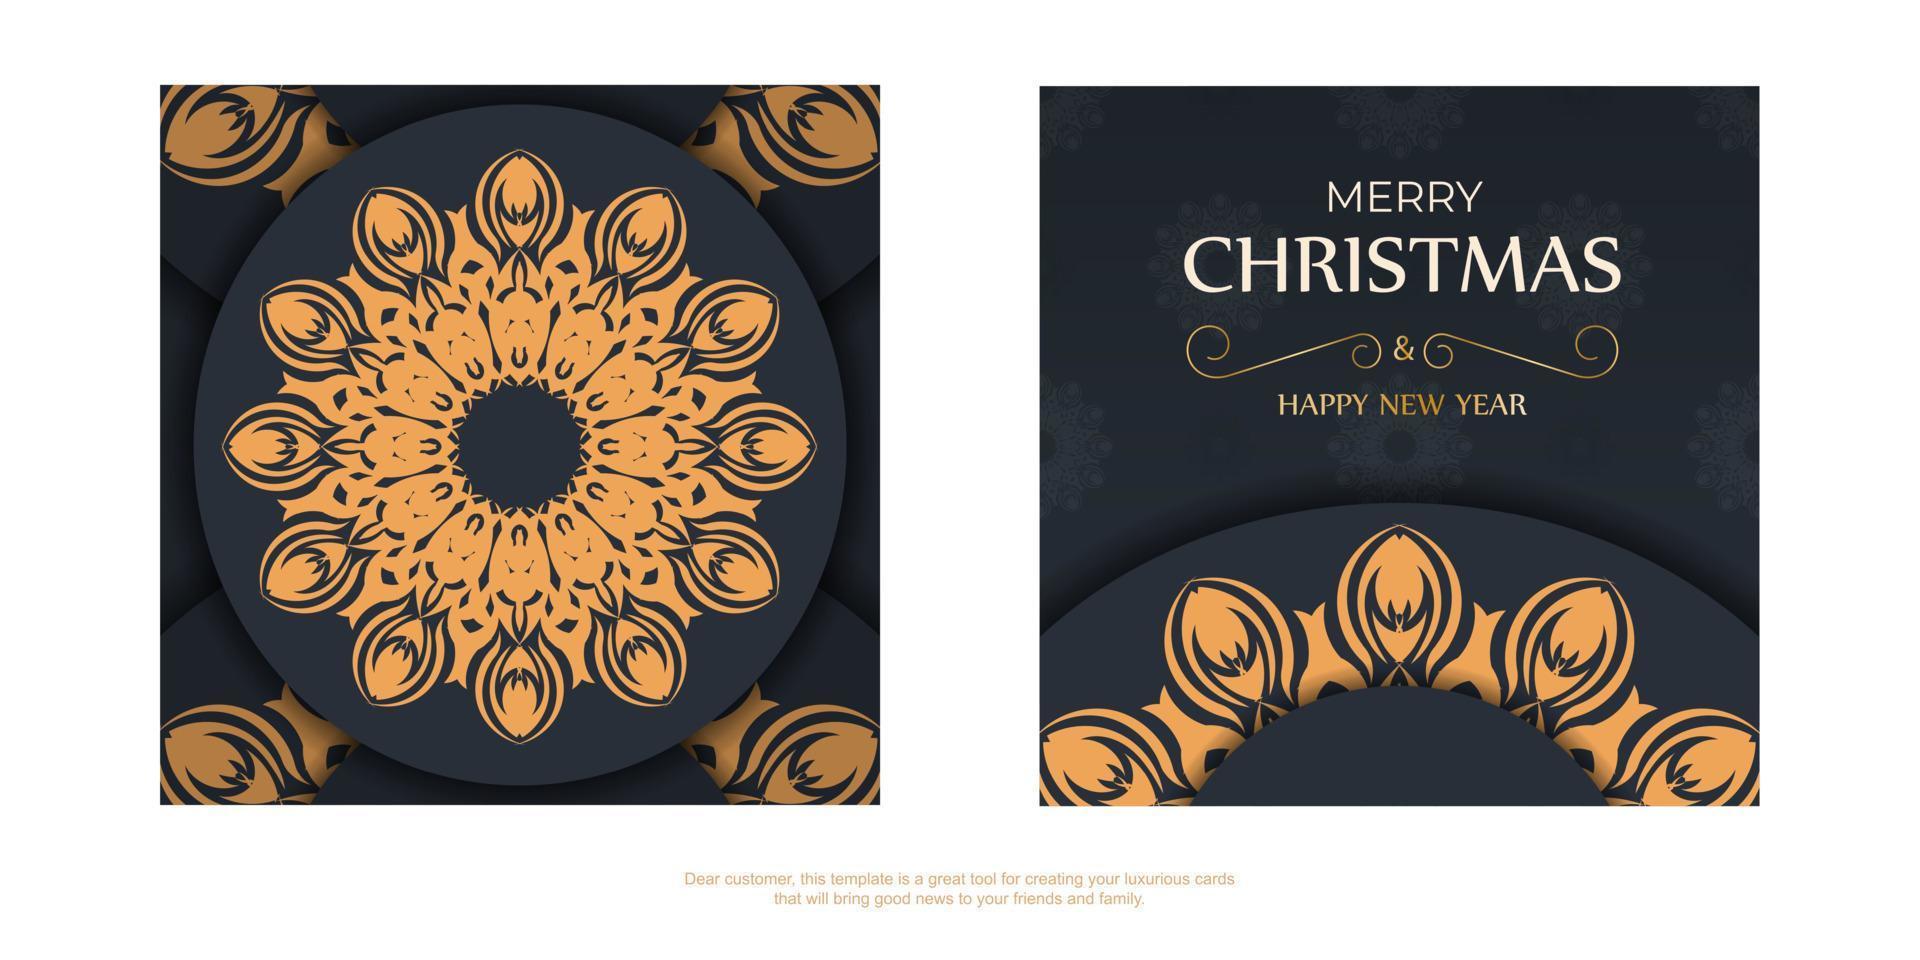 Merry Christmas Print ready gray card design with orange ornaments. Poster template Happy new year and winter patterns. vector